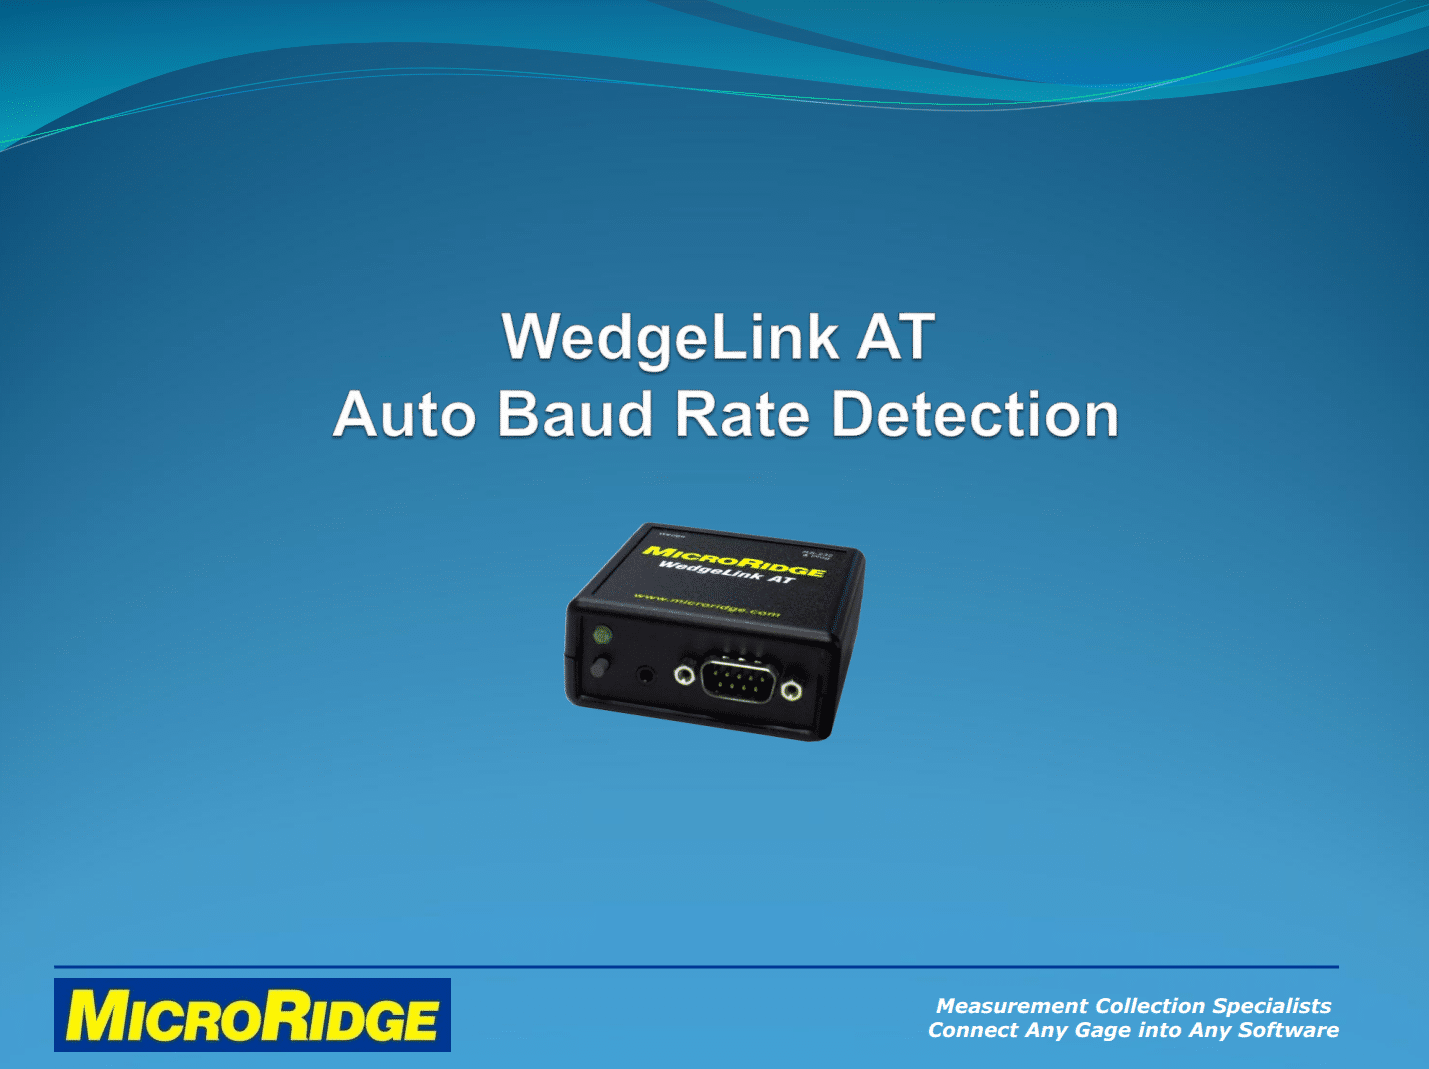 Auto Baud Rate Detection